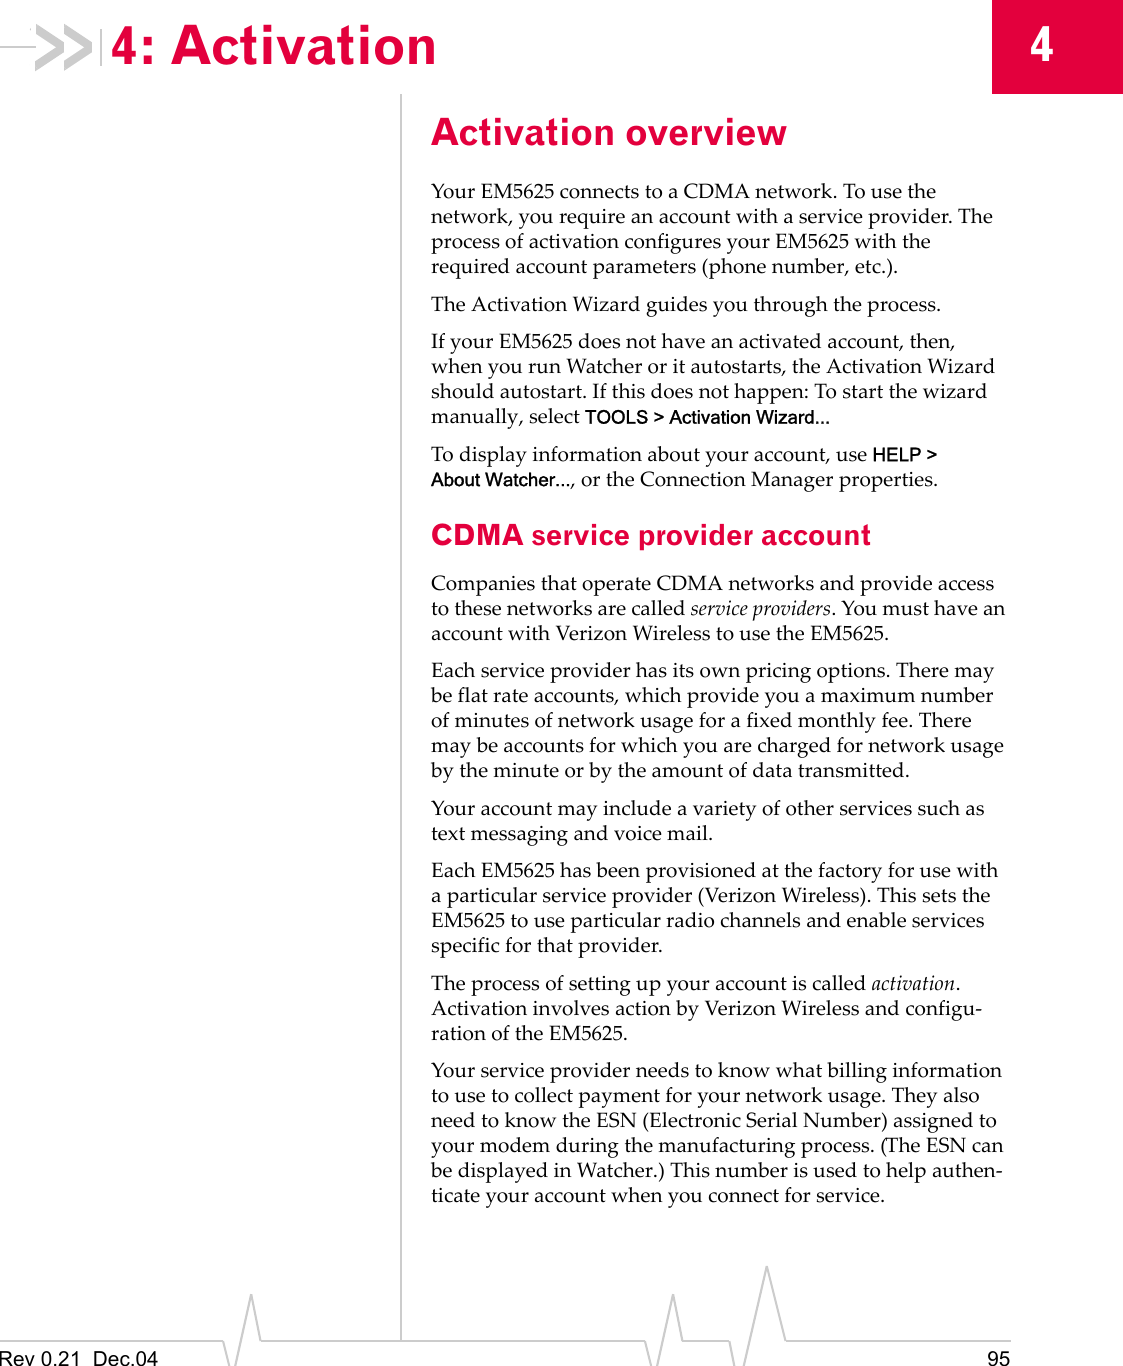 Rev 0.21  Dec.04 9544: ActivationActivation overviewYour EM5625 connects to a CDMA network. To use the network, you require an account with a service provider. The process of activation configures your EM5625 with the required account parameters (phone number, etc.).The Activation Wizard guides you through the process.If your EM5625 does not have an activated account, then, when you run Watcher or it autostarts, the Activation Wizard should autostart. If this does not happen: To start the wizard manually, select TOOLS &gt; Activation Wizard...To display information about your account, use HELP &gt; About Watcher..., or the Connection Manager properties.CDMA service provider accountCompanies that operate CDMA networks and provide access to these networks are called service providers. You must have an account with Verizon Wireless to use the EM5625.Each service provider has its own pricing options. There may be flat rate accounts, which provide you a maximum number of minutes of network usage for a fixed monthly fee. There may be accounts for which you are charged for network usage by the minute or by the amount of data transmitted.Your account may include a variety of other services such as text messaging and voice mail.Each EM5625 has been provisioned at the factory for use with a particular service provider (Verizon Wireless). This sets the EM5625 to use particular radio channels and enable services specific for that provider.The process of setting up your account is called activation. Activation involves action by Verizon Wireless and configu-ration of the EM5625.Your service provider needs to know what billing information to use to collect payment for your network usage. They also need to know the ESN (Electronic Serial Number) assigned to your modem during the manufacturing process. (The ESN can be displayed in Watcher.) This number is used to help authen-ticate your account when you connect for service.